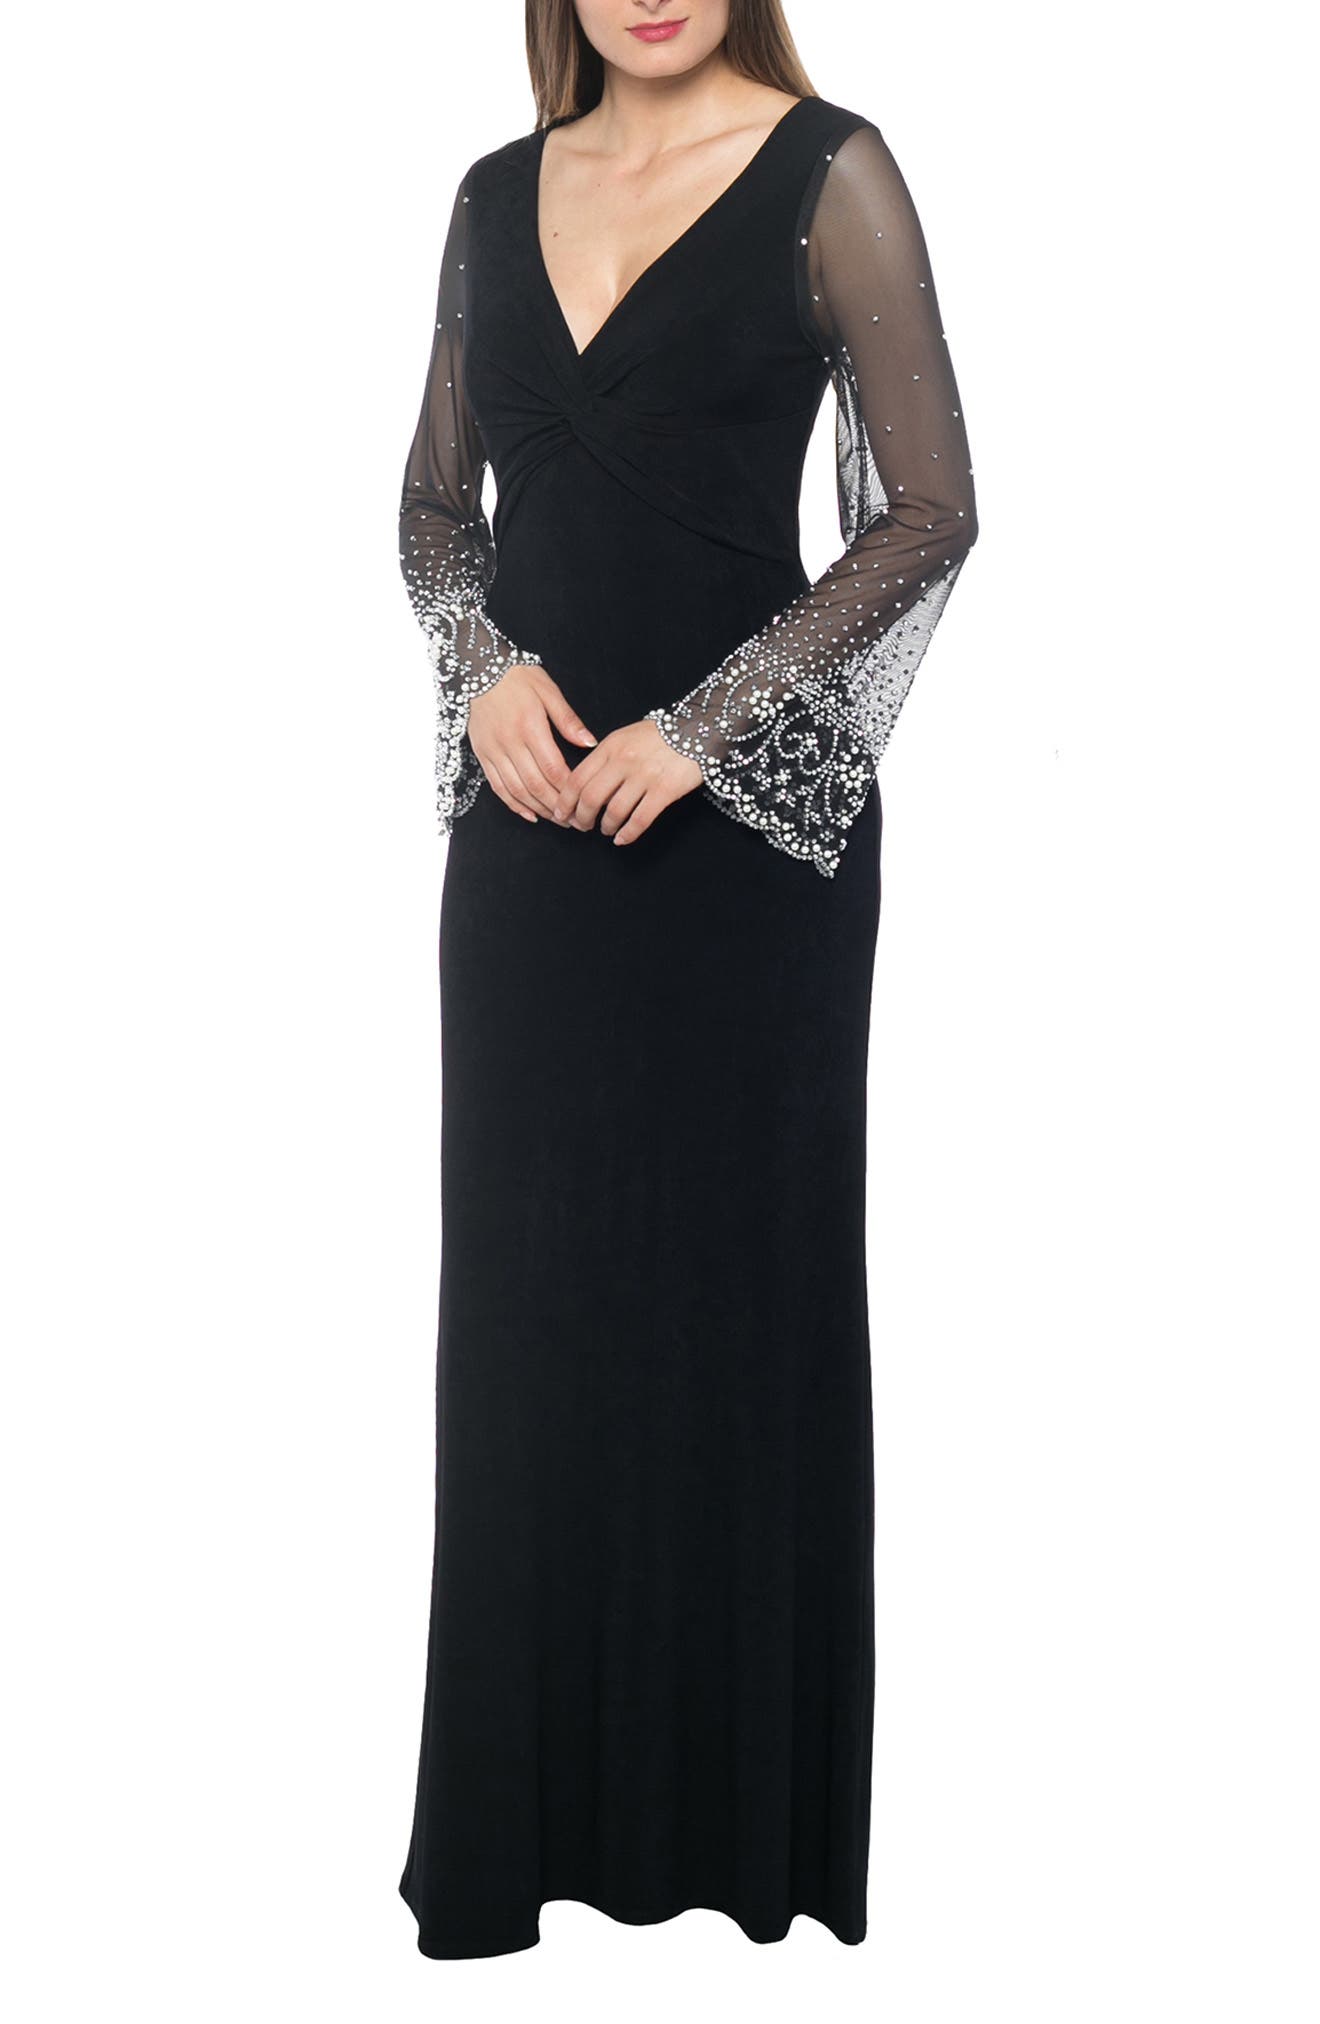 1920s Style Dresses, 1920s Dress Fashions You Will Love Marina Beaded Sheer Sleeve Gown in Black at Nordstrom Rack Size 14 $96.97 AT vintagedancer.com